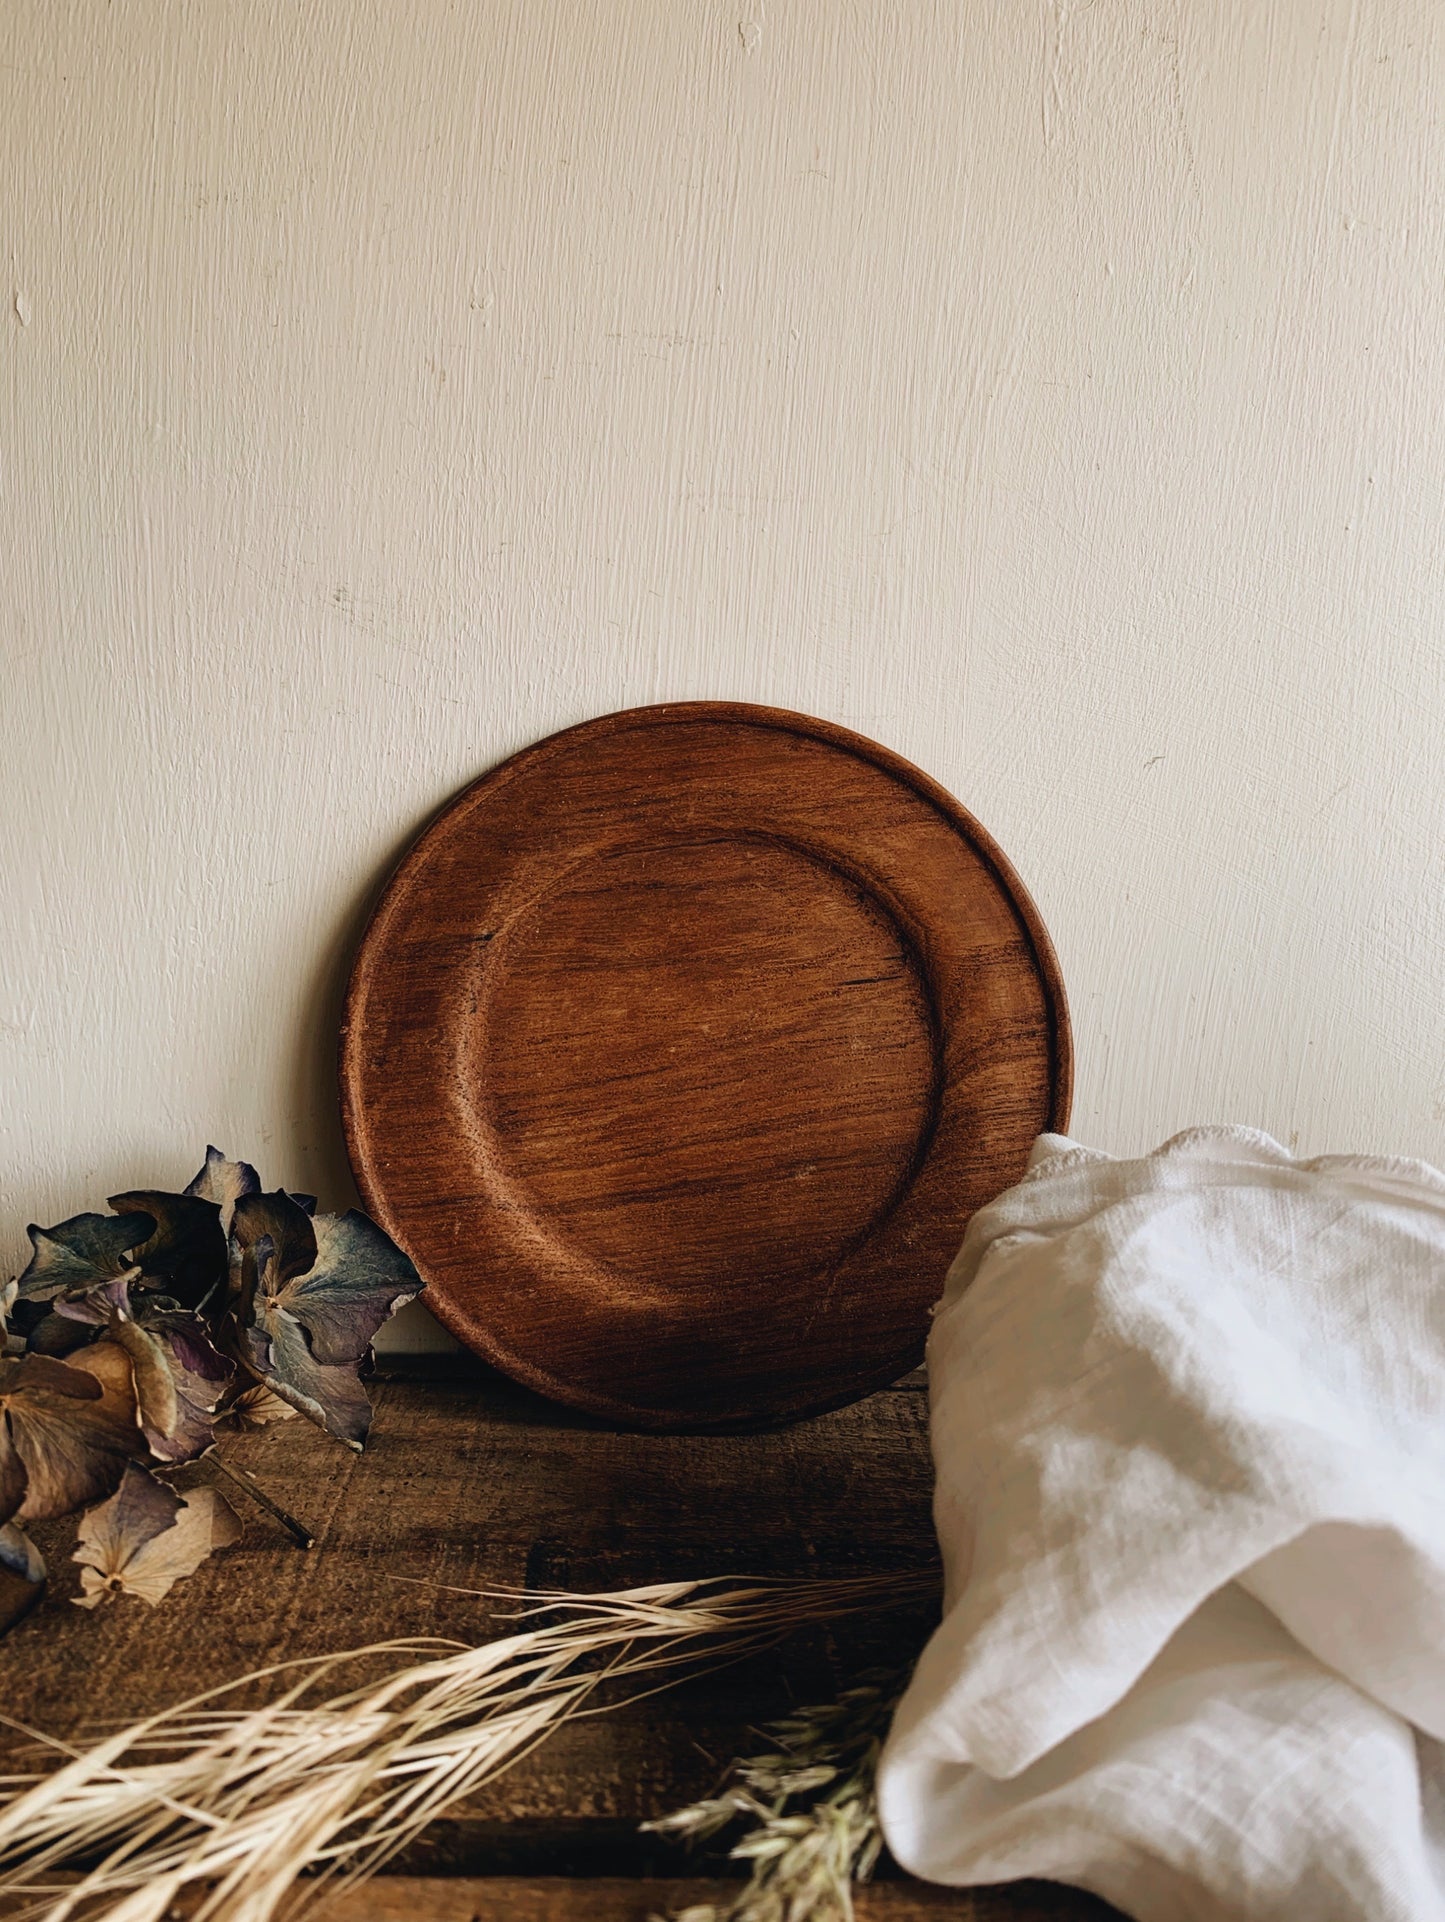 Rustic Wooden Plate